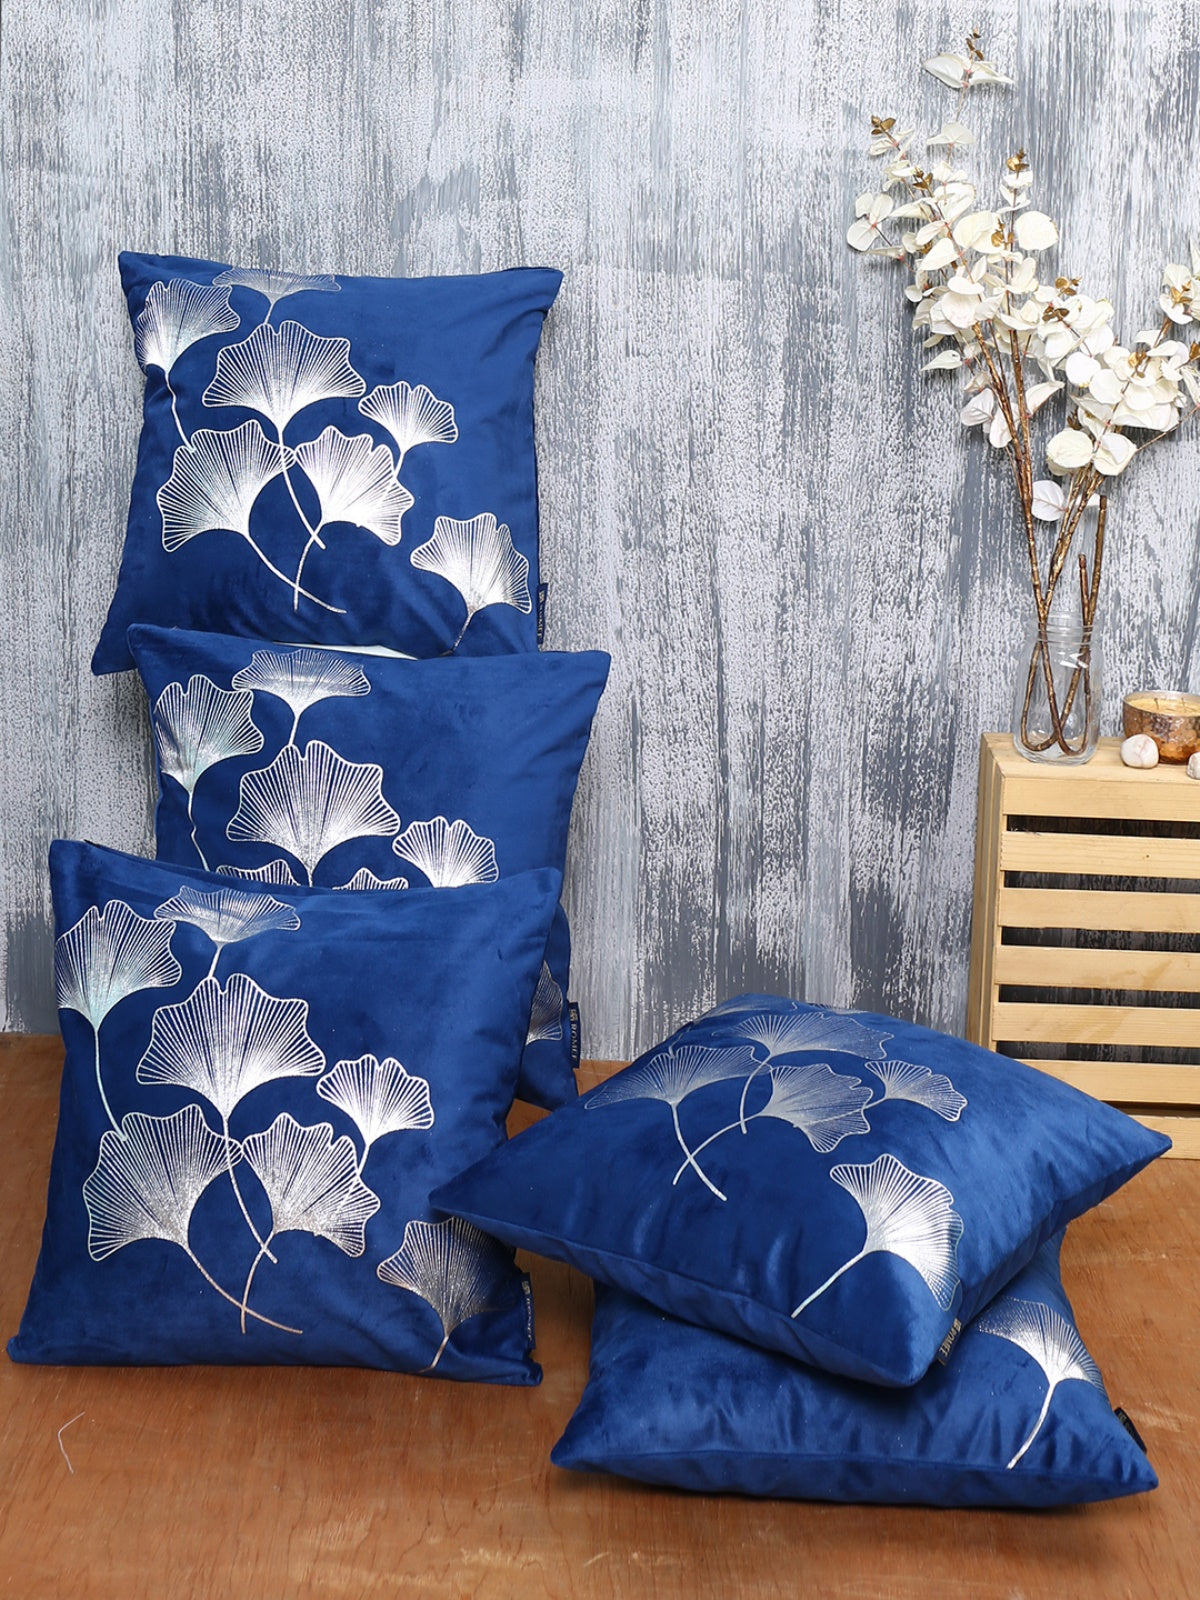 Blue Set of 5 Polyester 16 Inch x 16 Inch Cushion Covers